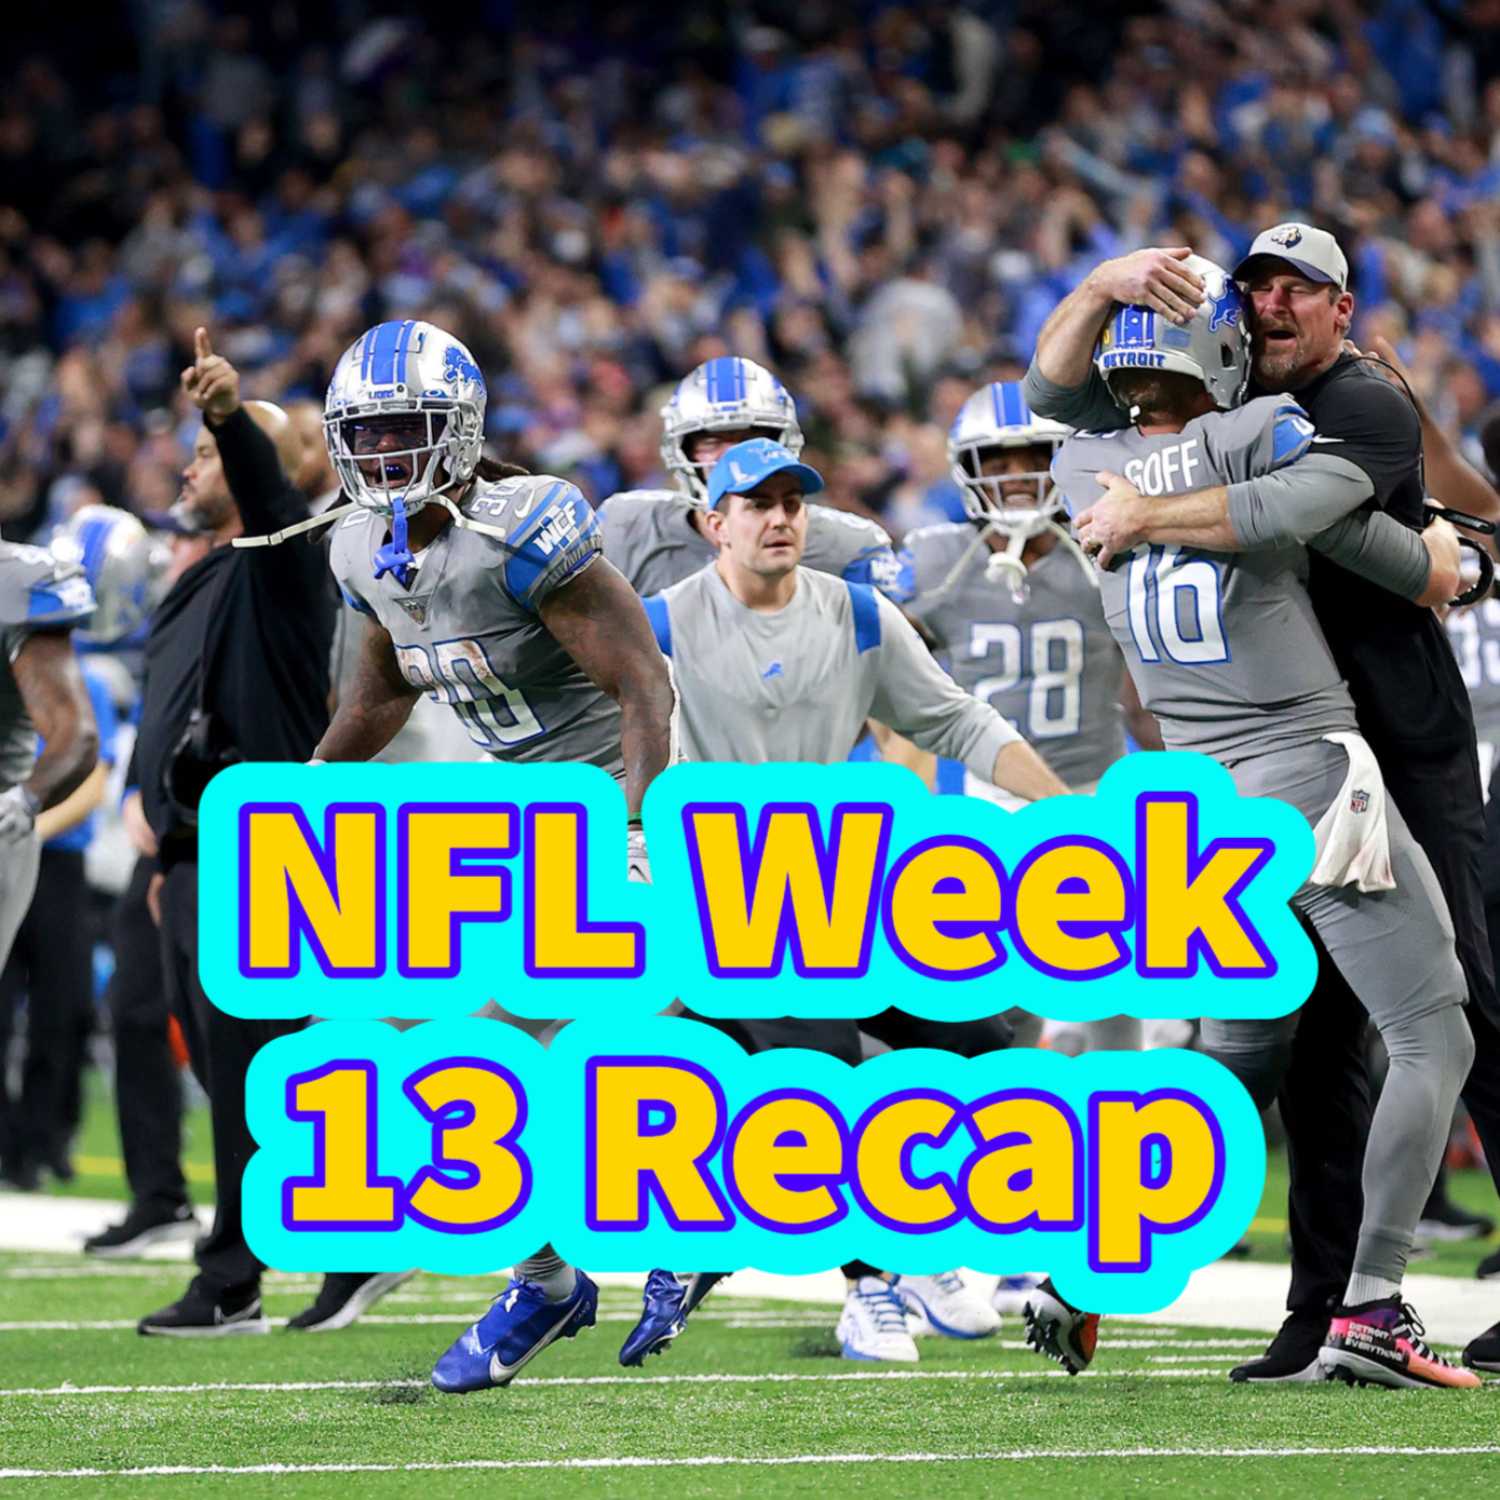 NFL Week 13 Recap | Patriots SB contenders? | Lions finally win one | QB controversy in Philly?? | Miami goes on to 5 in a row | Rams crashing & burning?